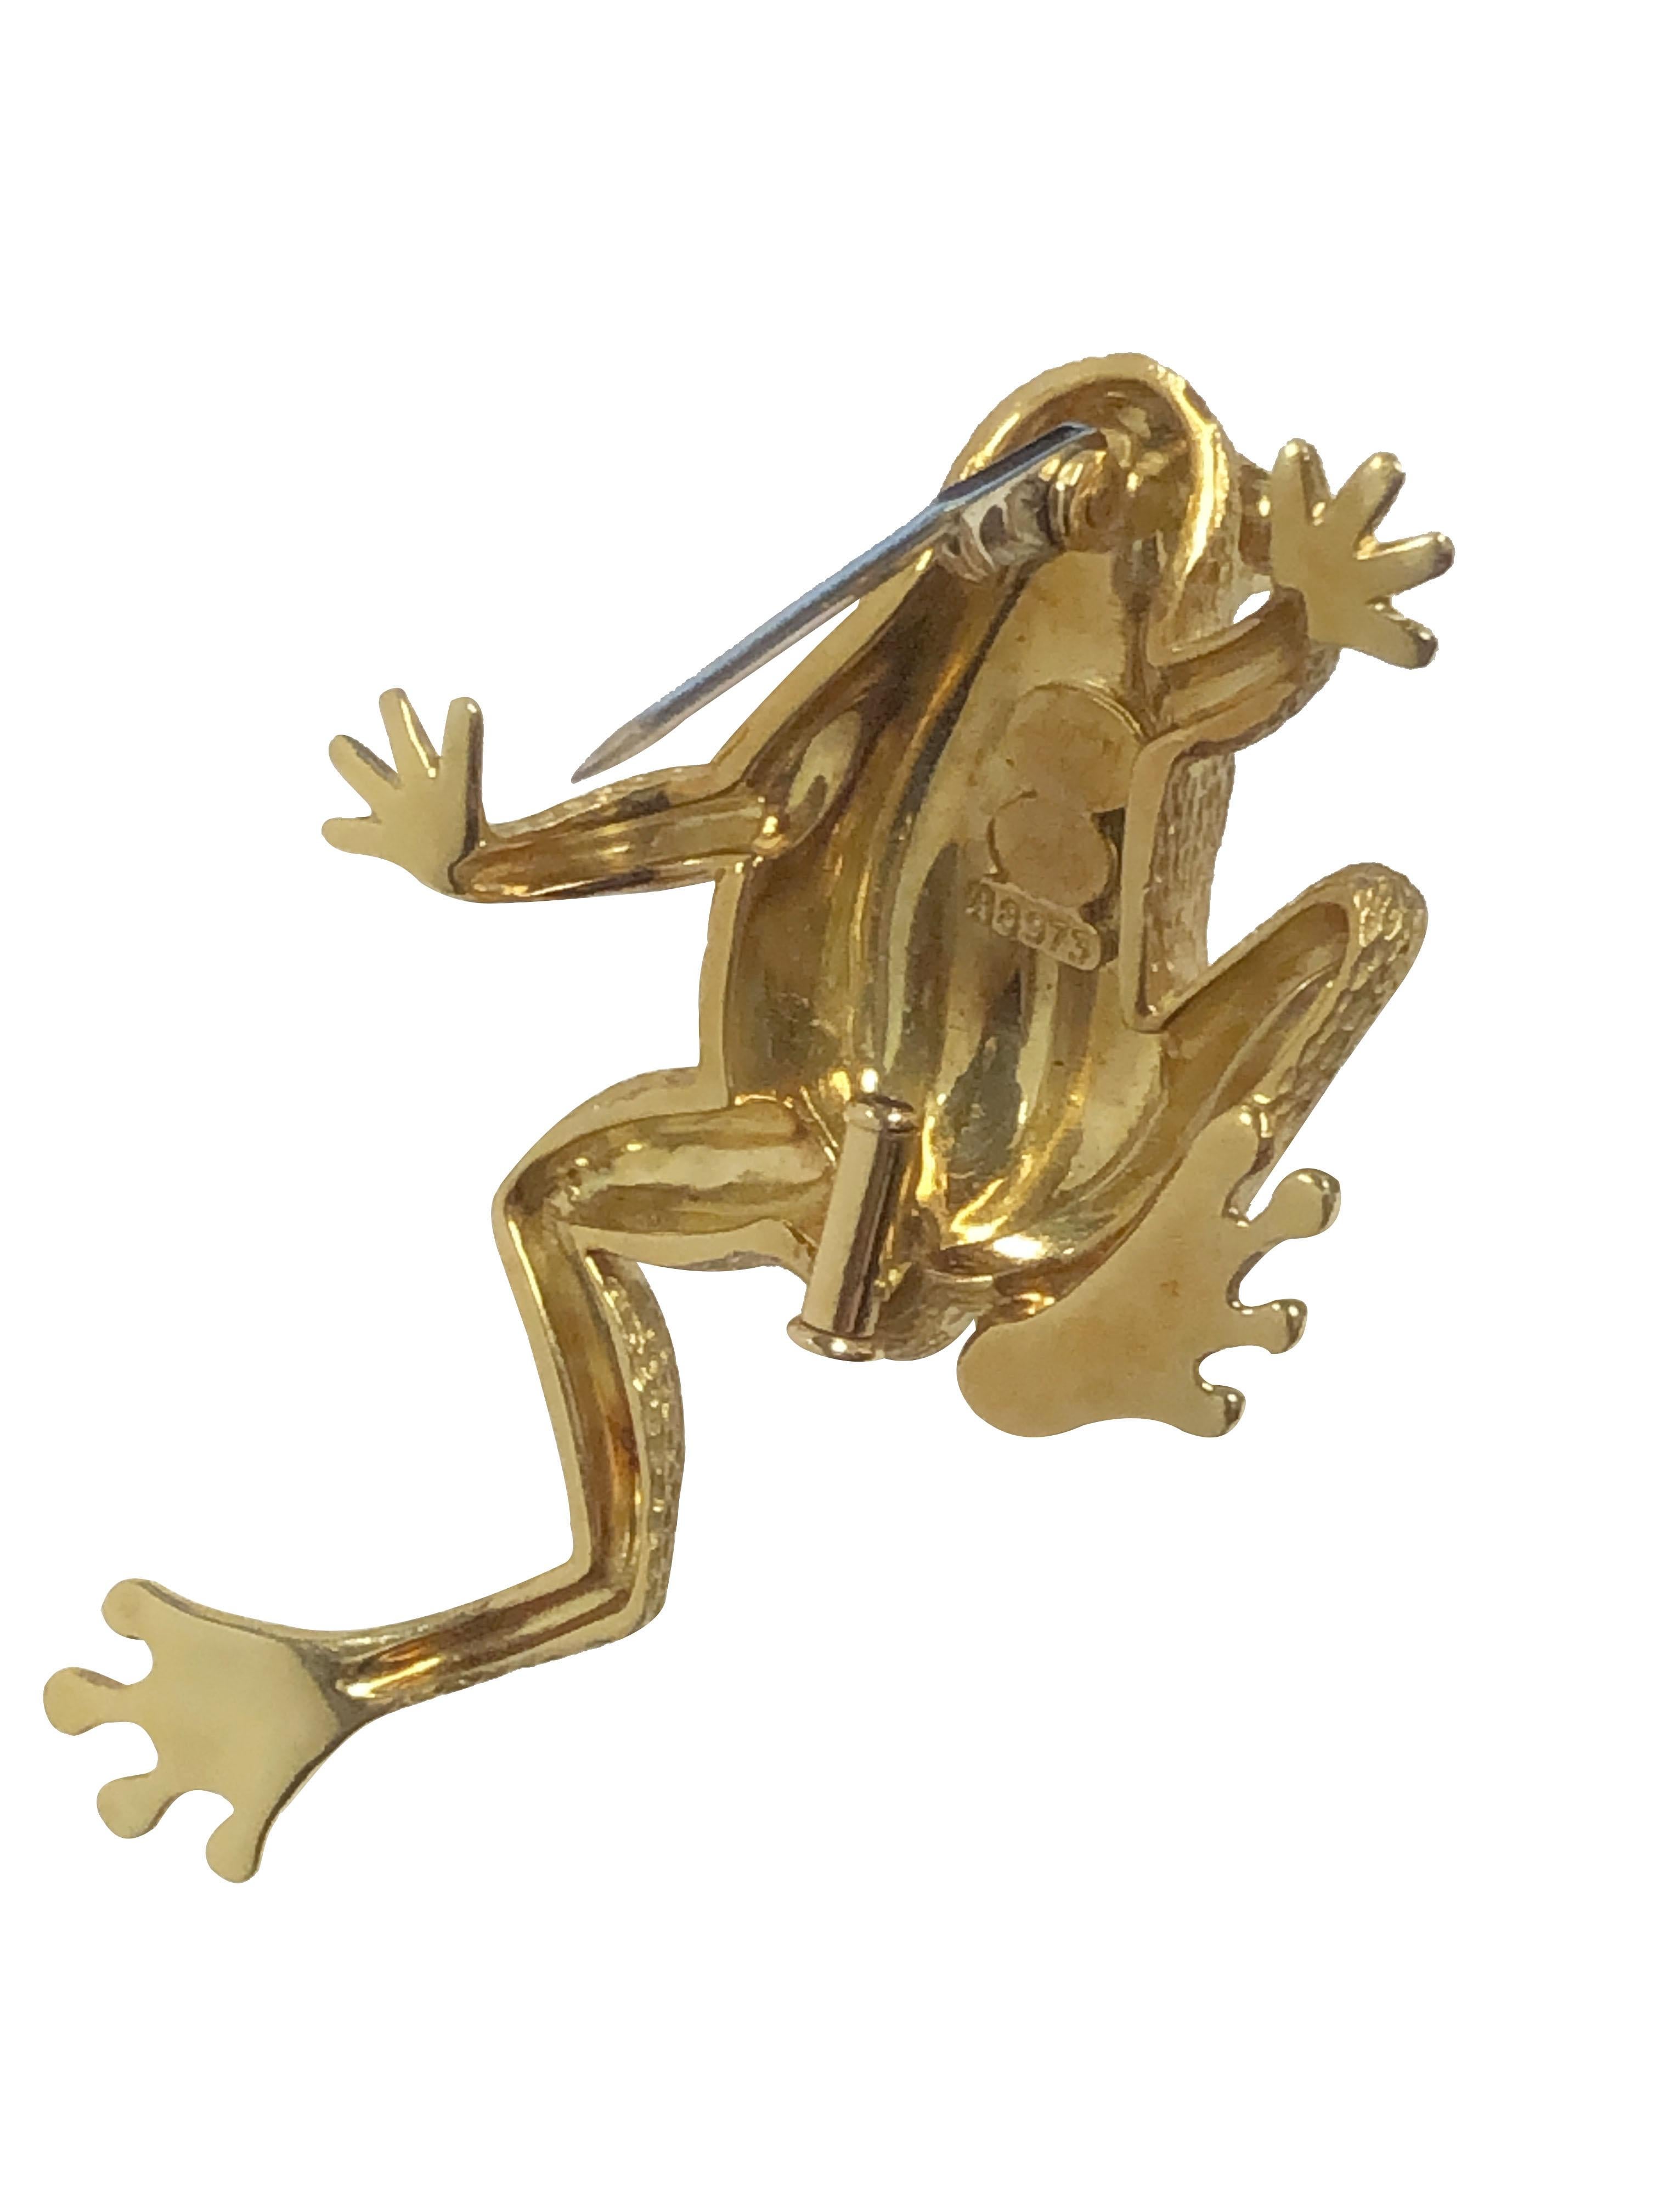 Circa 1990 Henry Dunay Frog Brooch, measuring 2 1/8 inches in length X 1 1/4 inches and weighing 21.5 Grams. Very Detailed with a realistic textured finish. Signed and numbered.